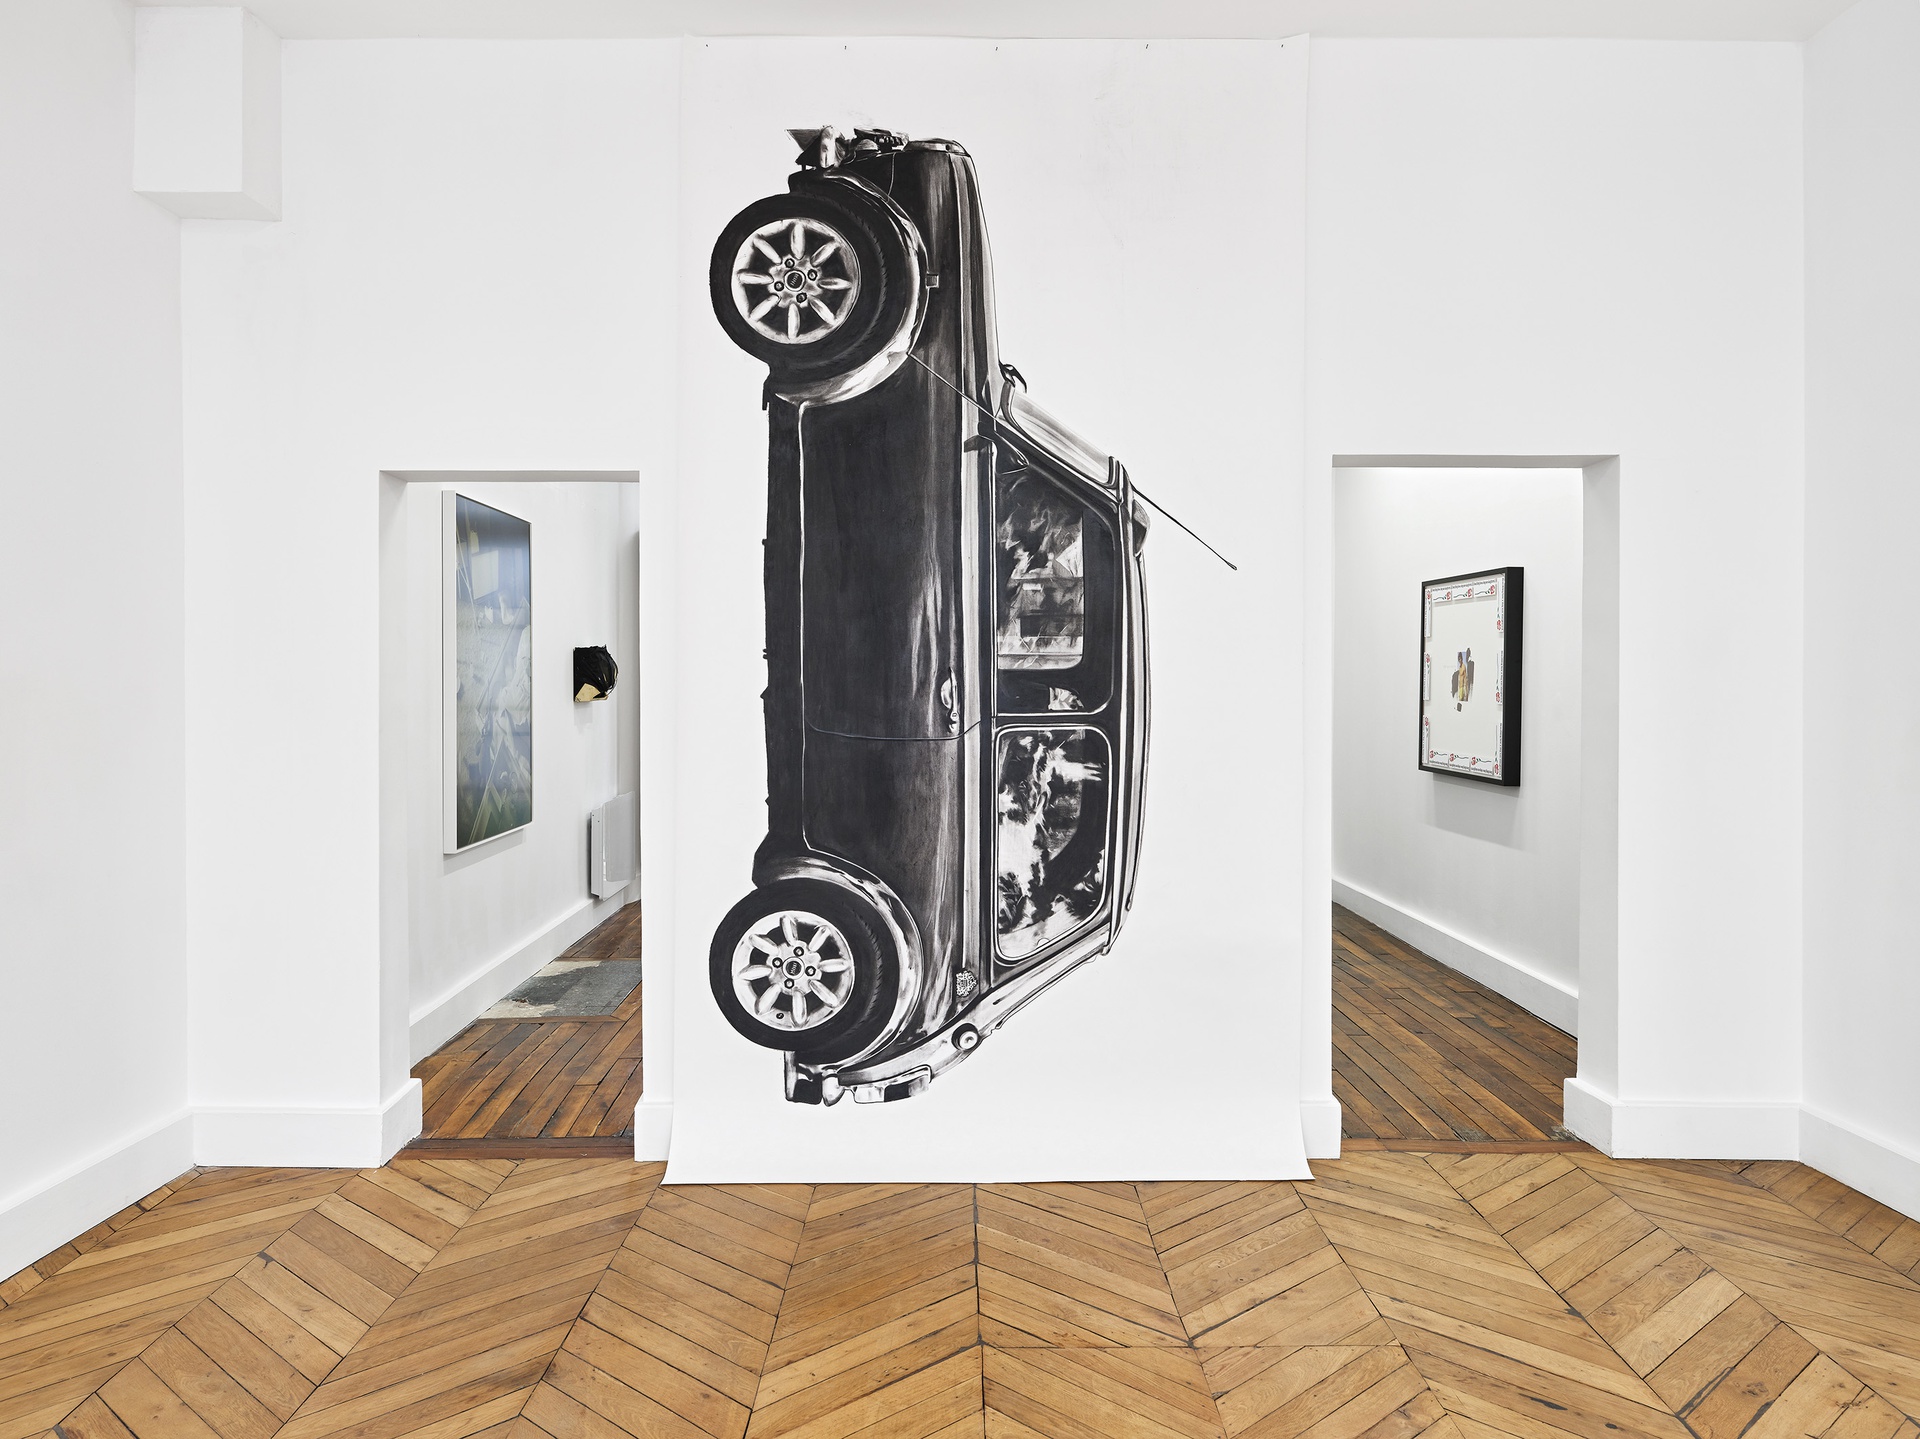 Angharad Williams, Mini Cooper 1.3i, 2022charcoal on paper305 x 134 cmInstallation View Unto Dust, 2023 at Fitzpatrick Gallery, Paris